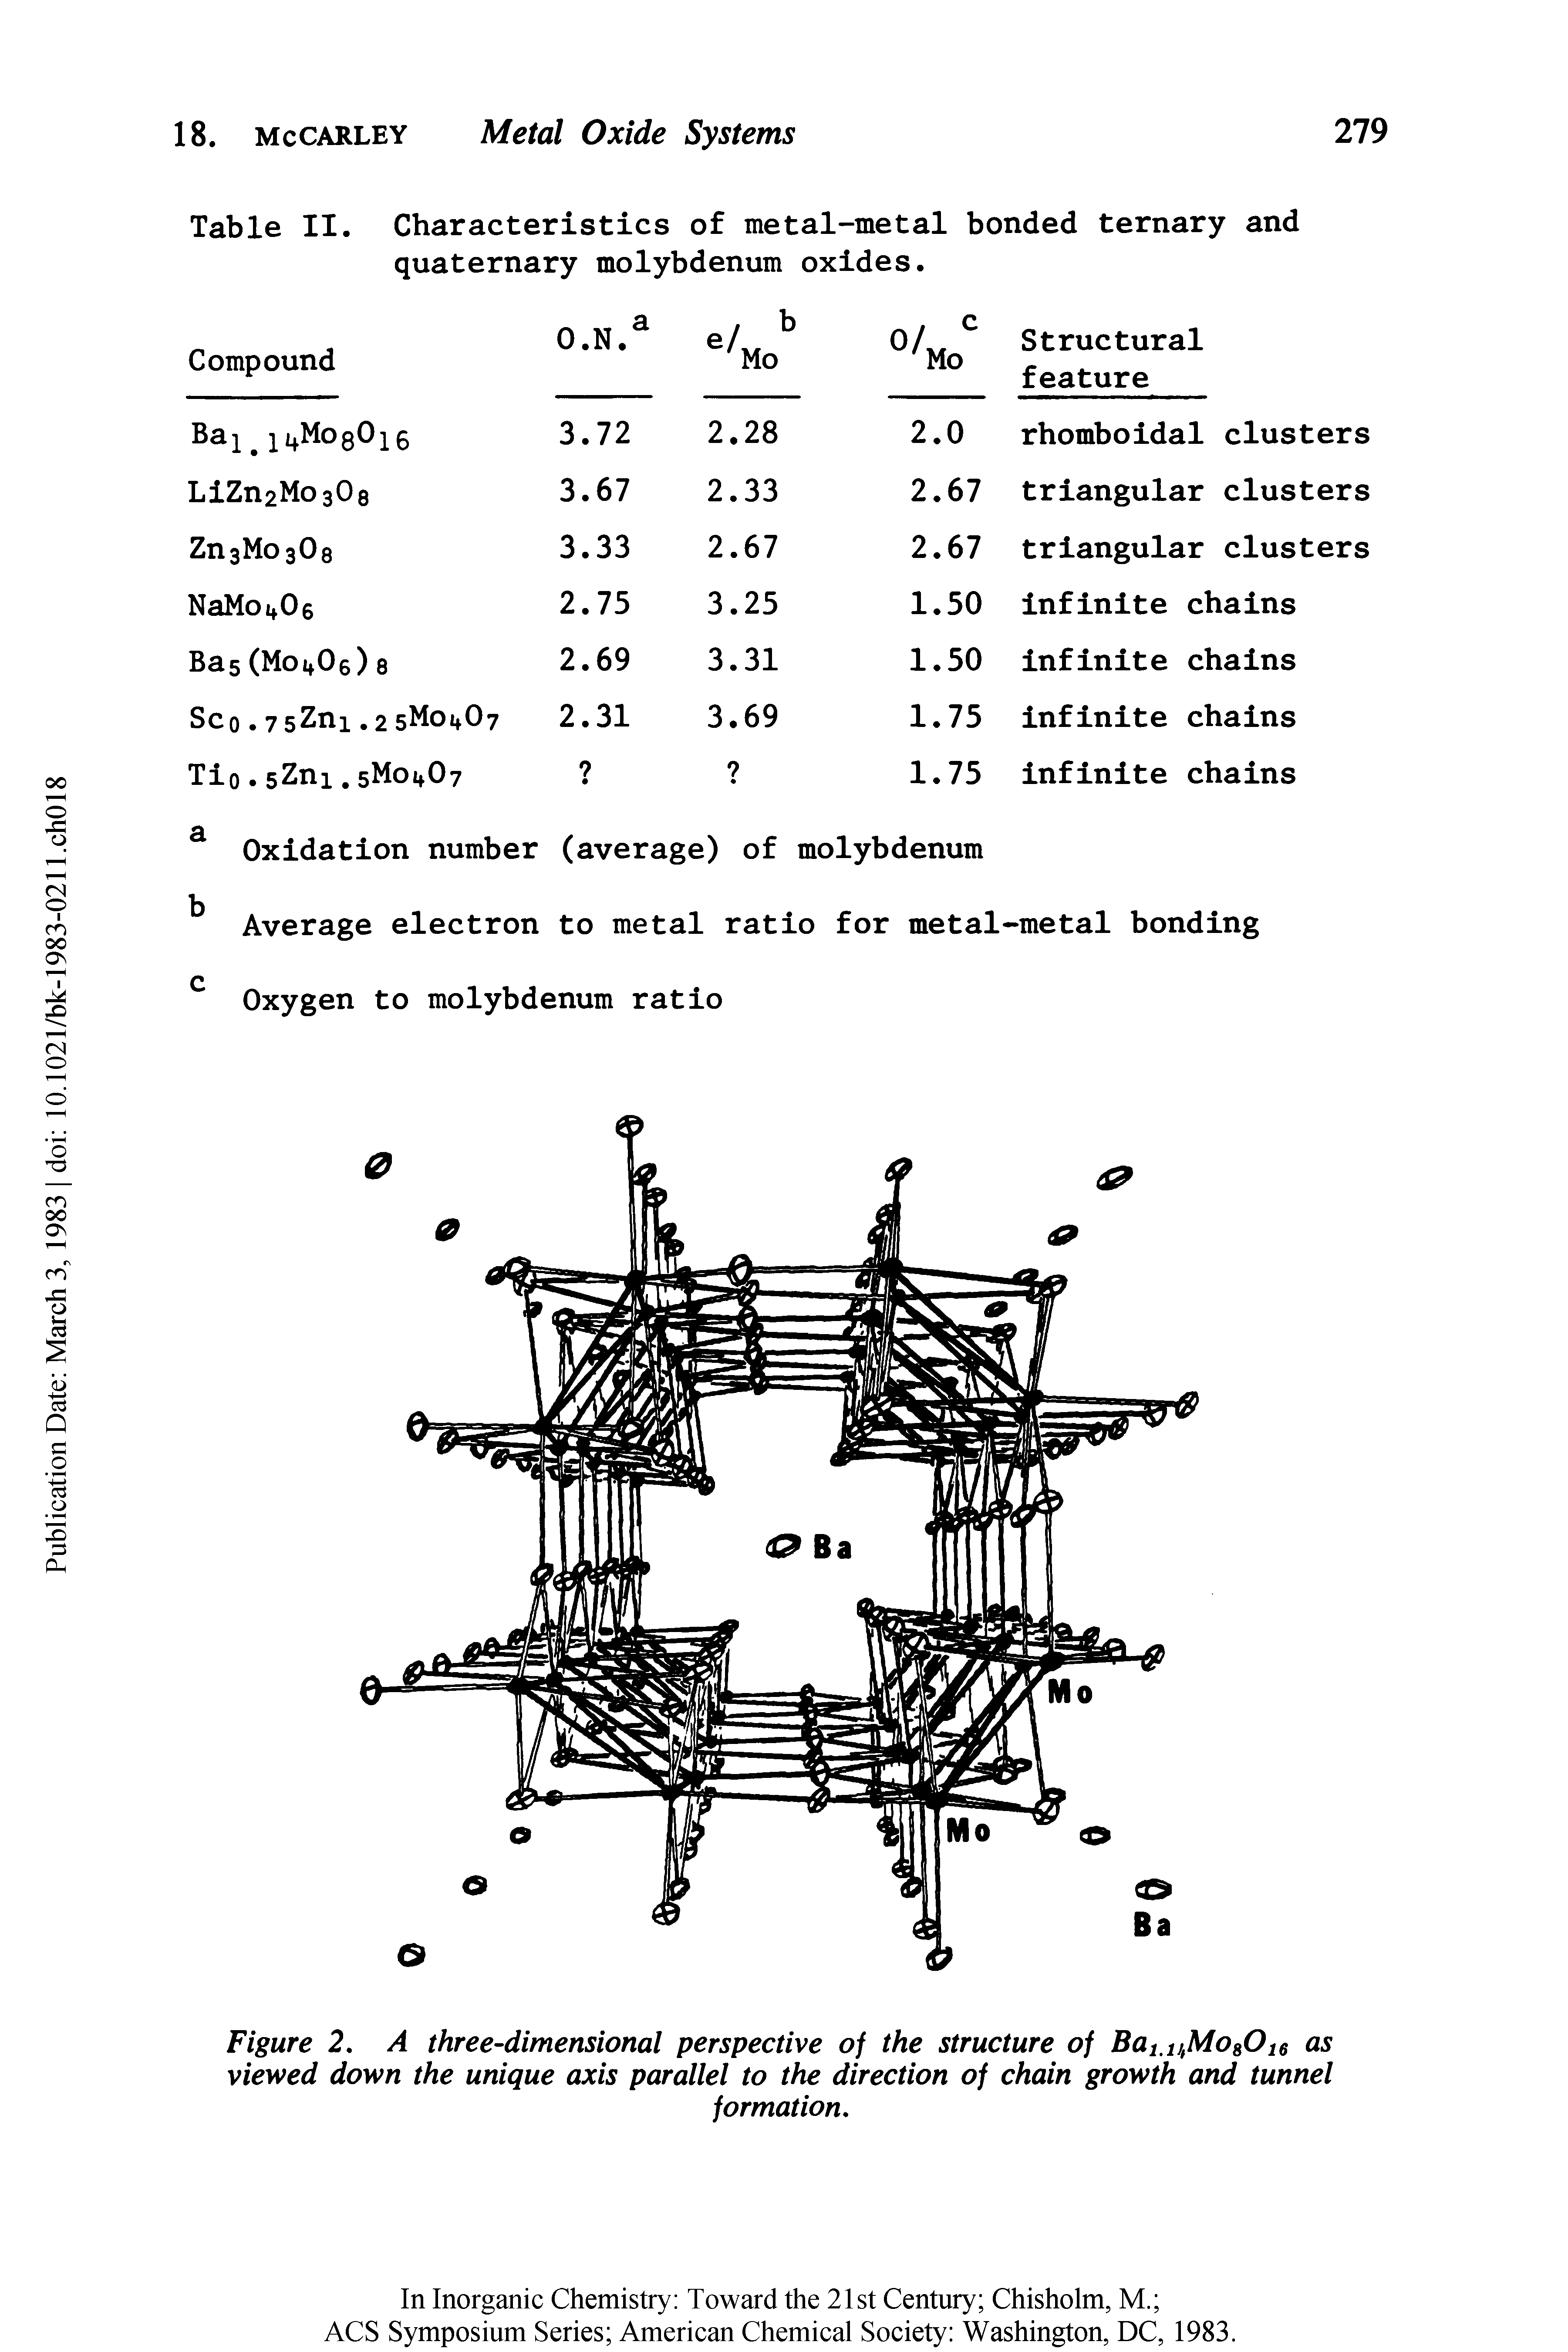 Table II. Characteristics of metal-metal bonded ternary and quaternary molybdenum oxides.